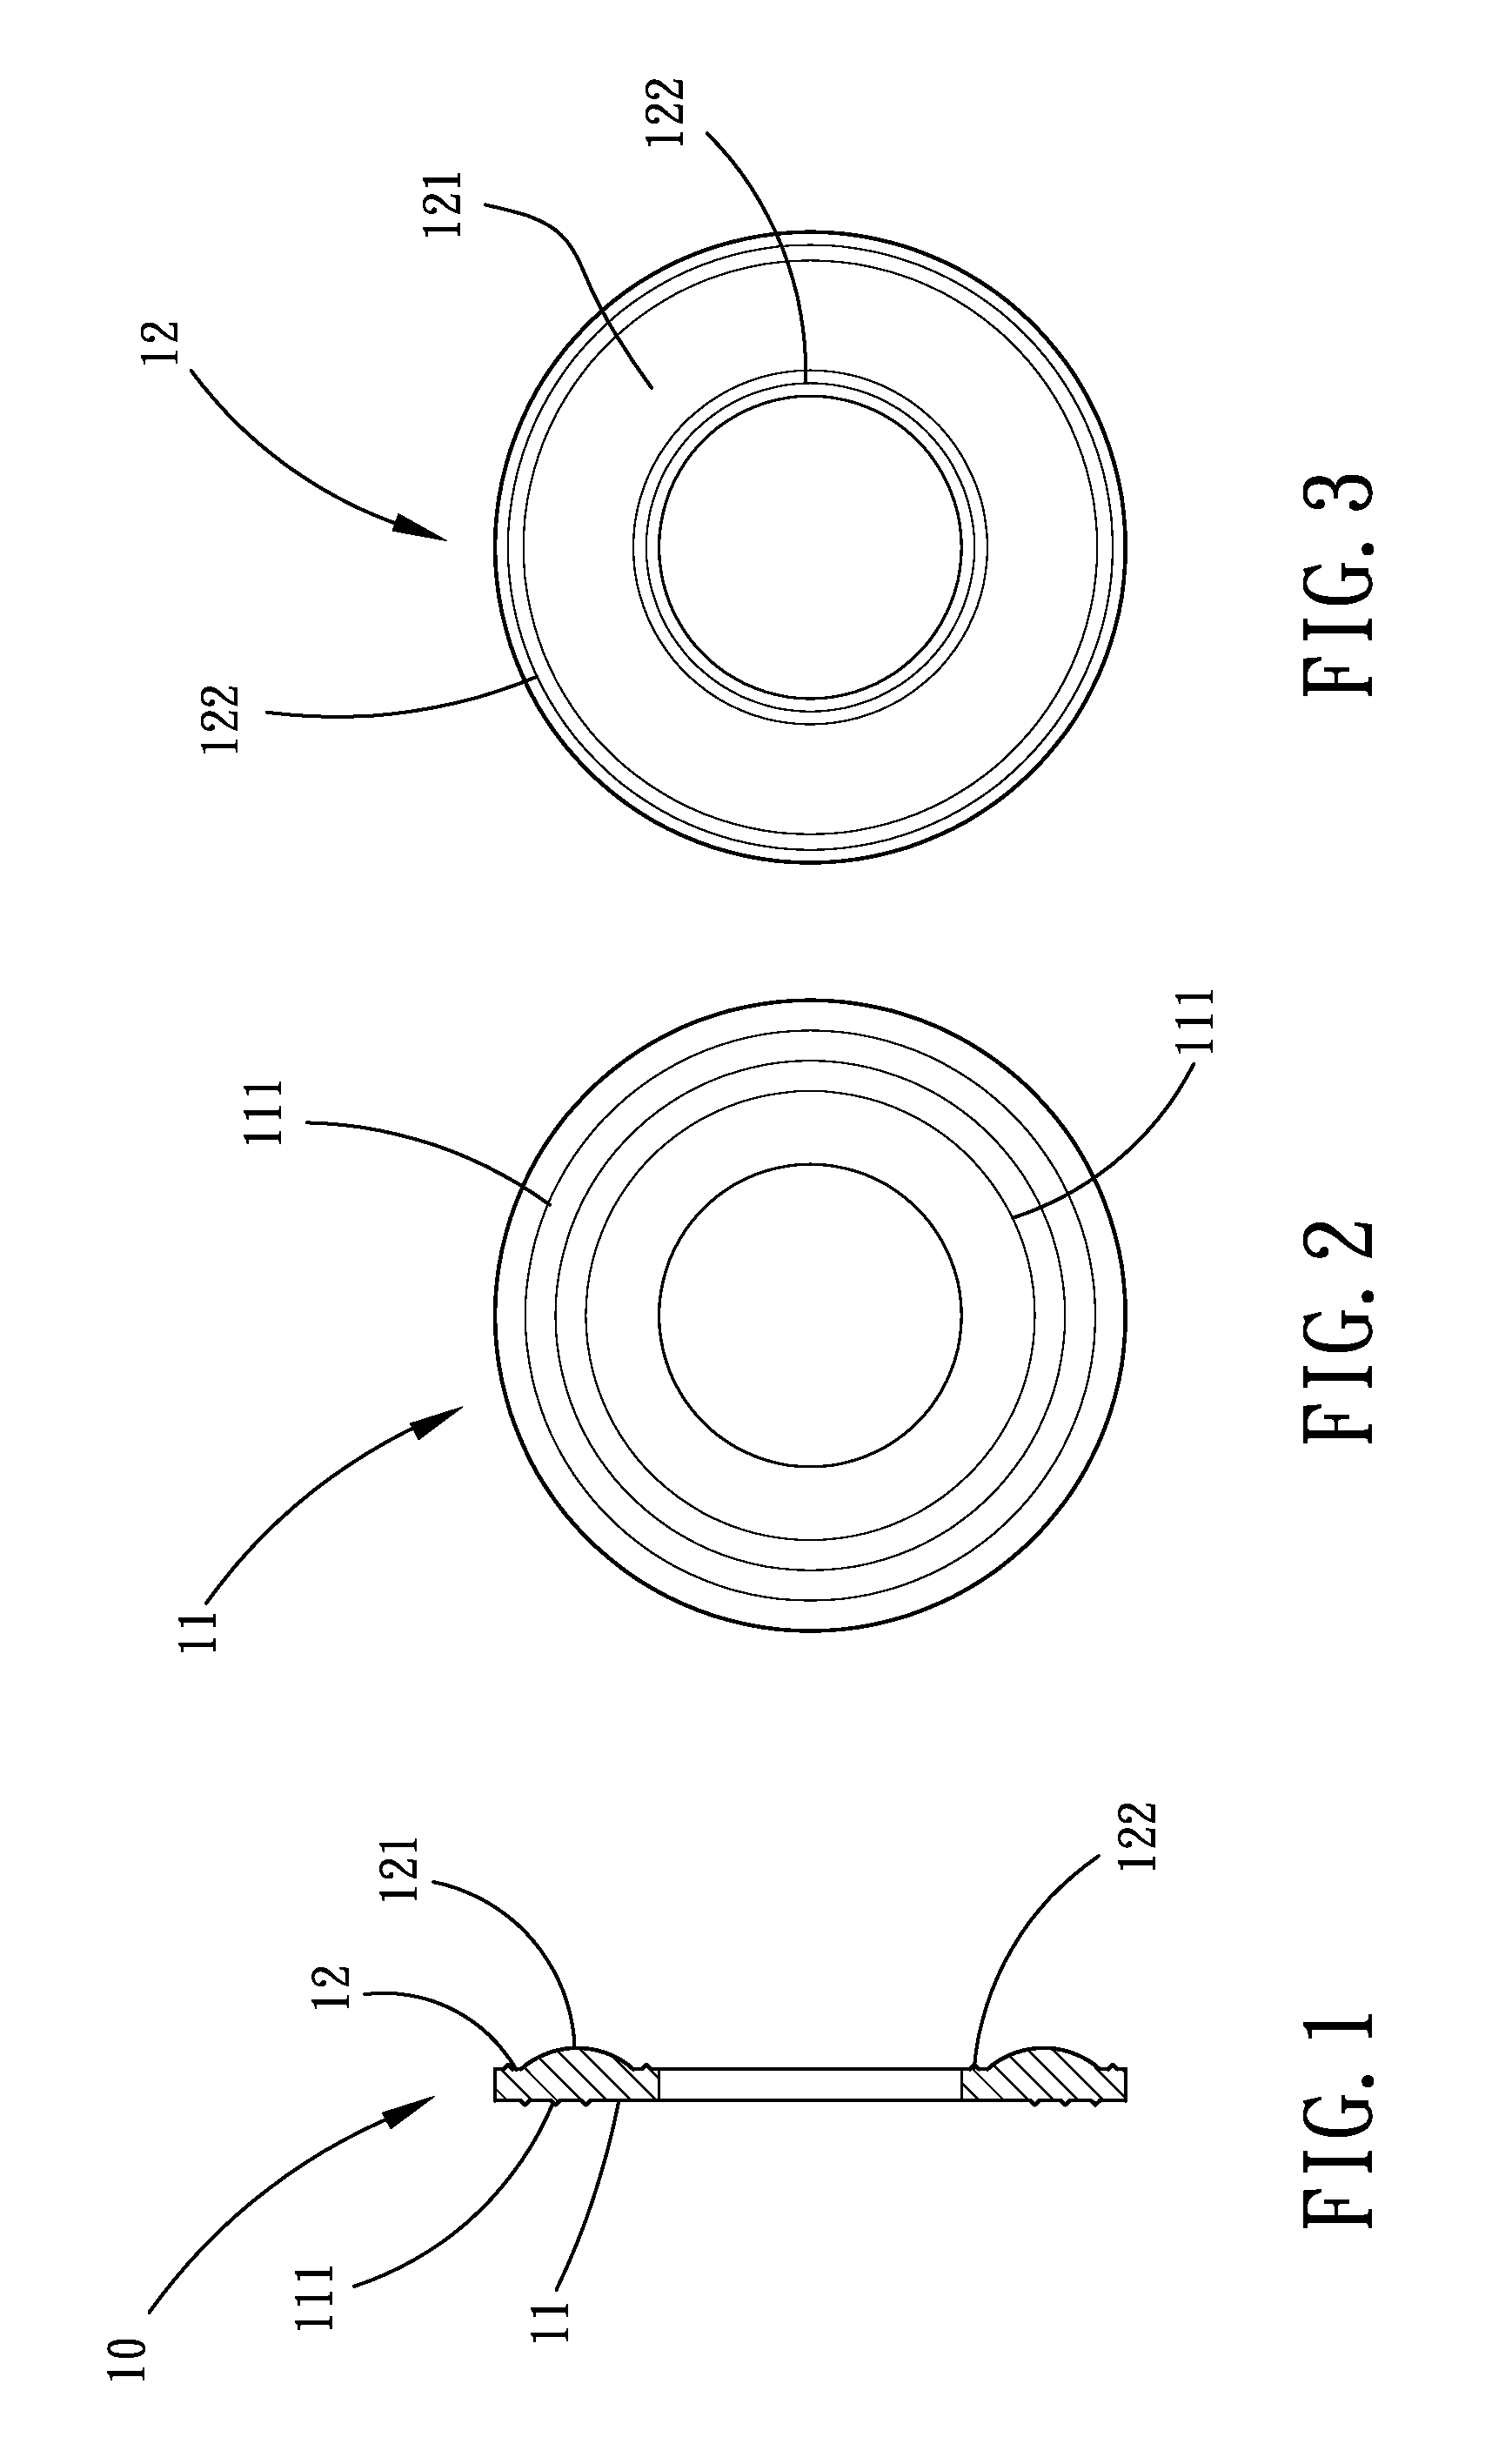 Cable gland and gasket ring assembly